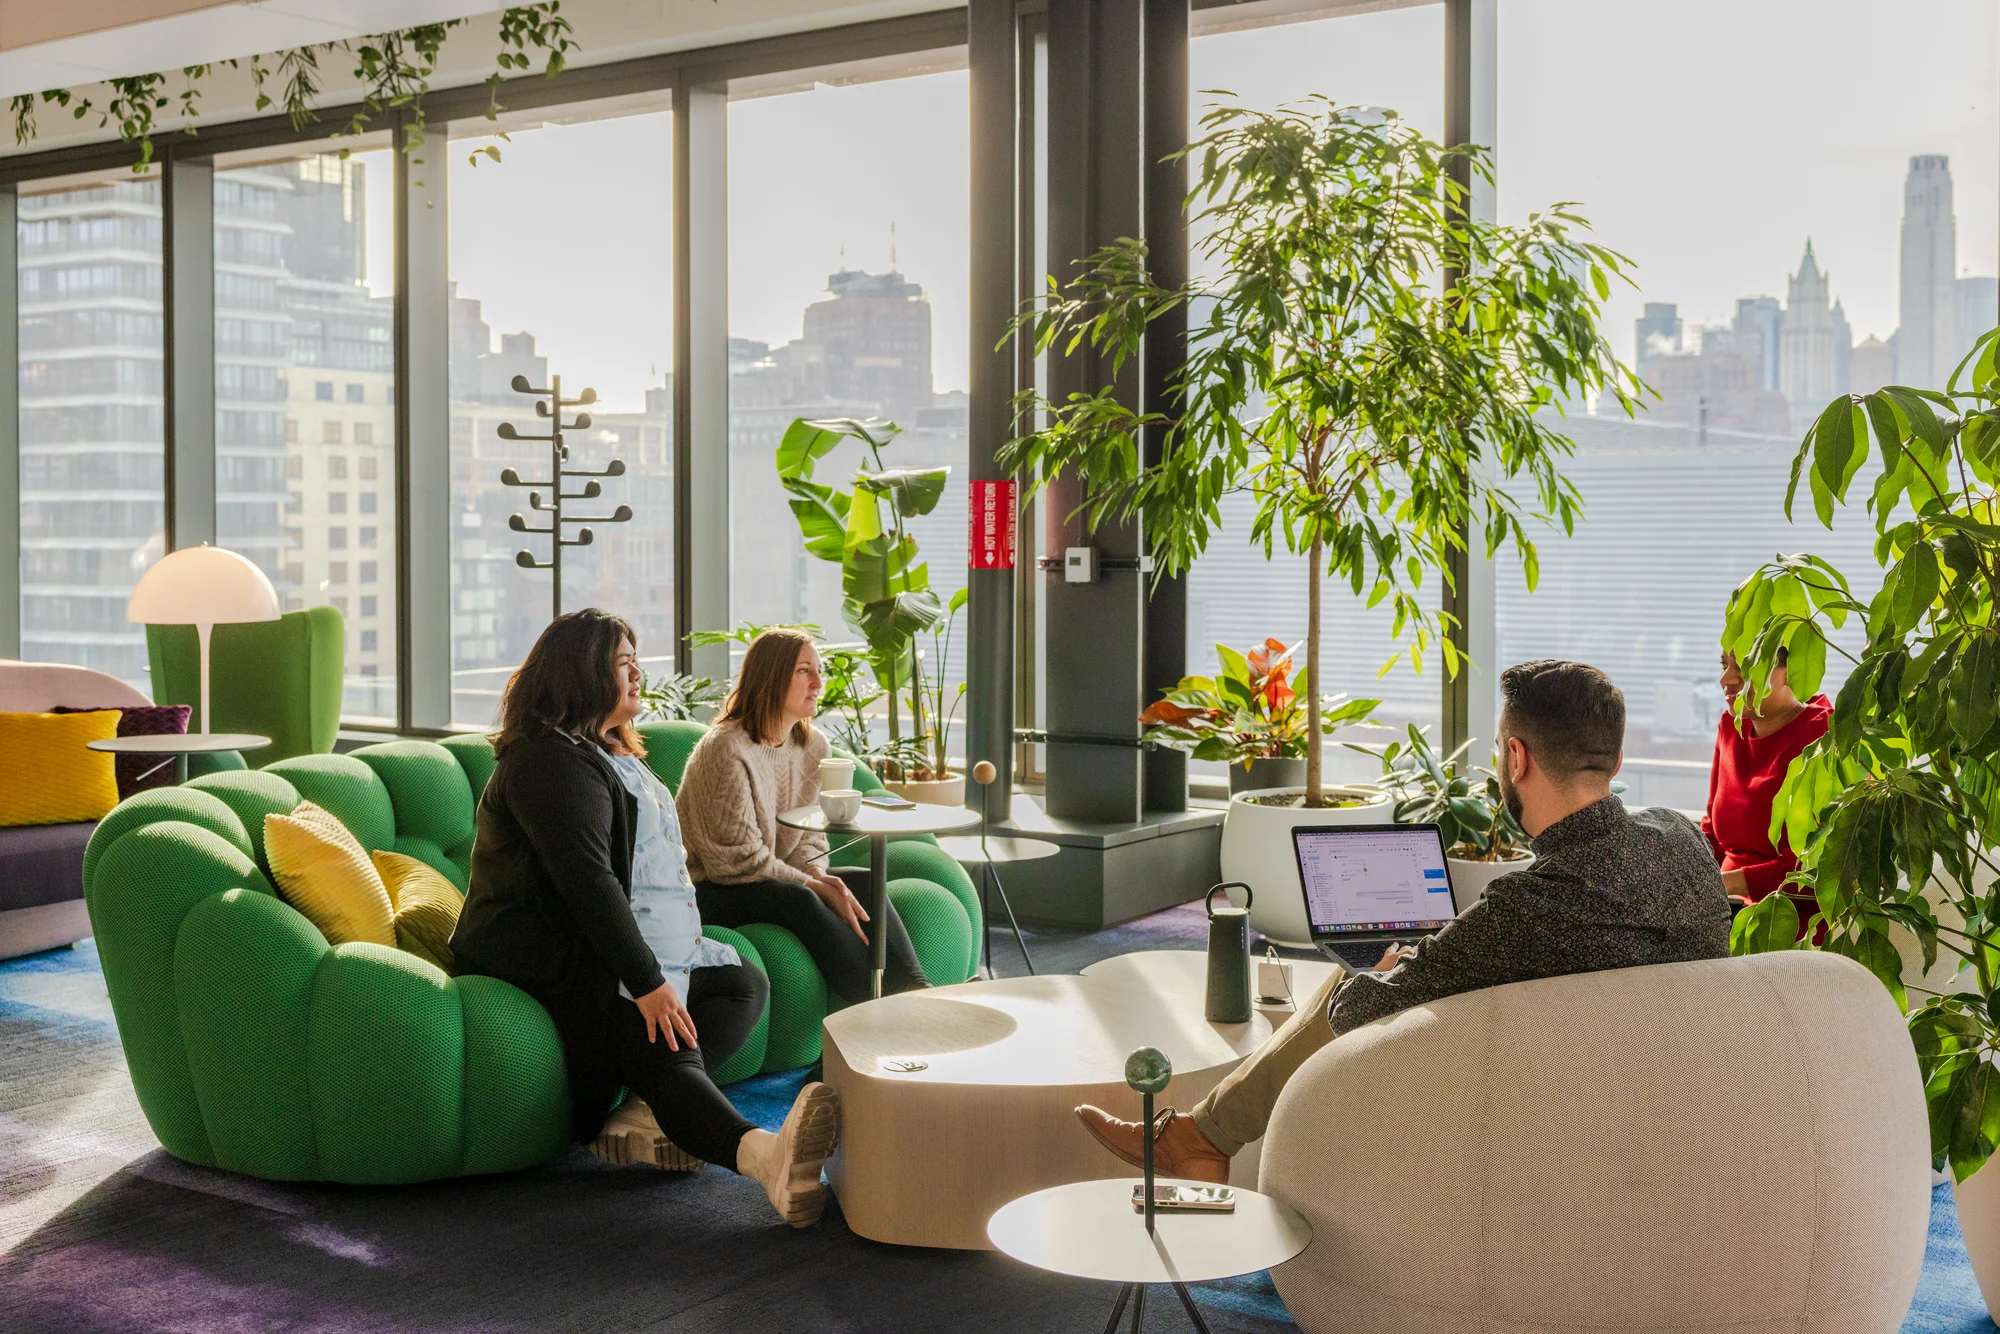 Two Googlers sit on a green couch, collaborating with their colleagues in one of the building's work lounges. In the background, floor to ceiling windows look out upon the New York skyline.